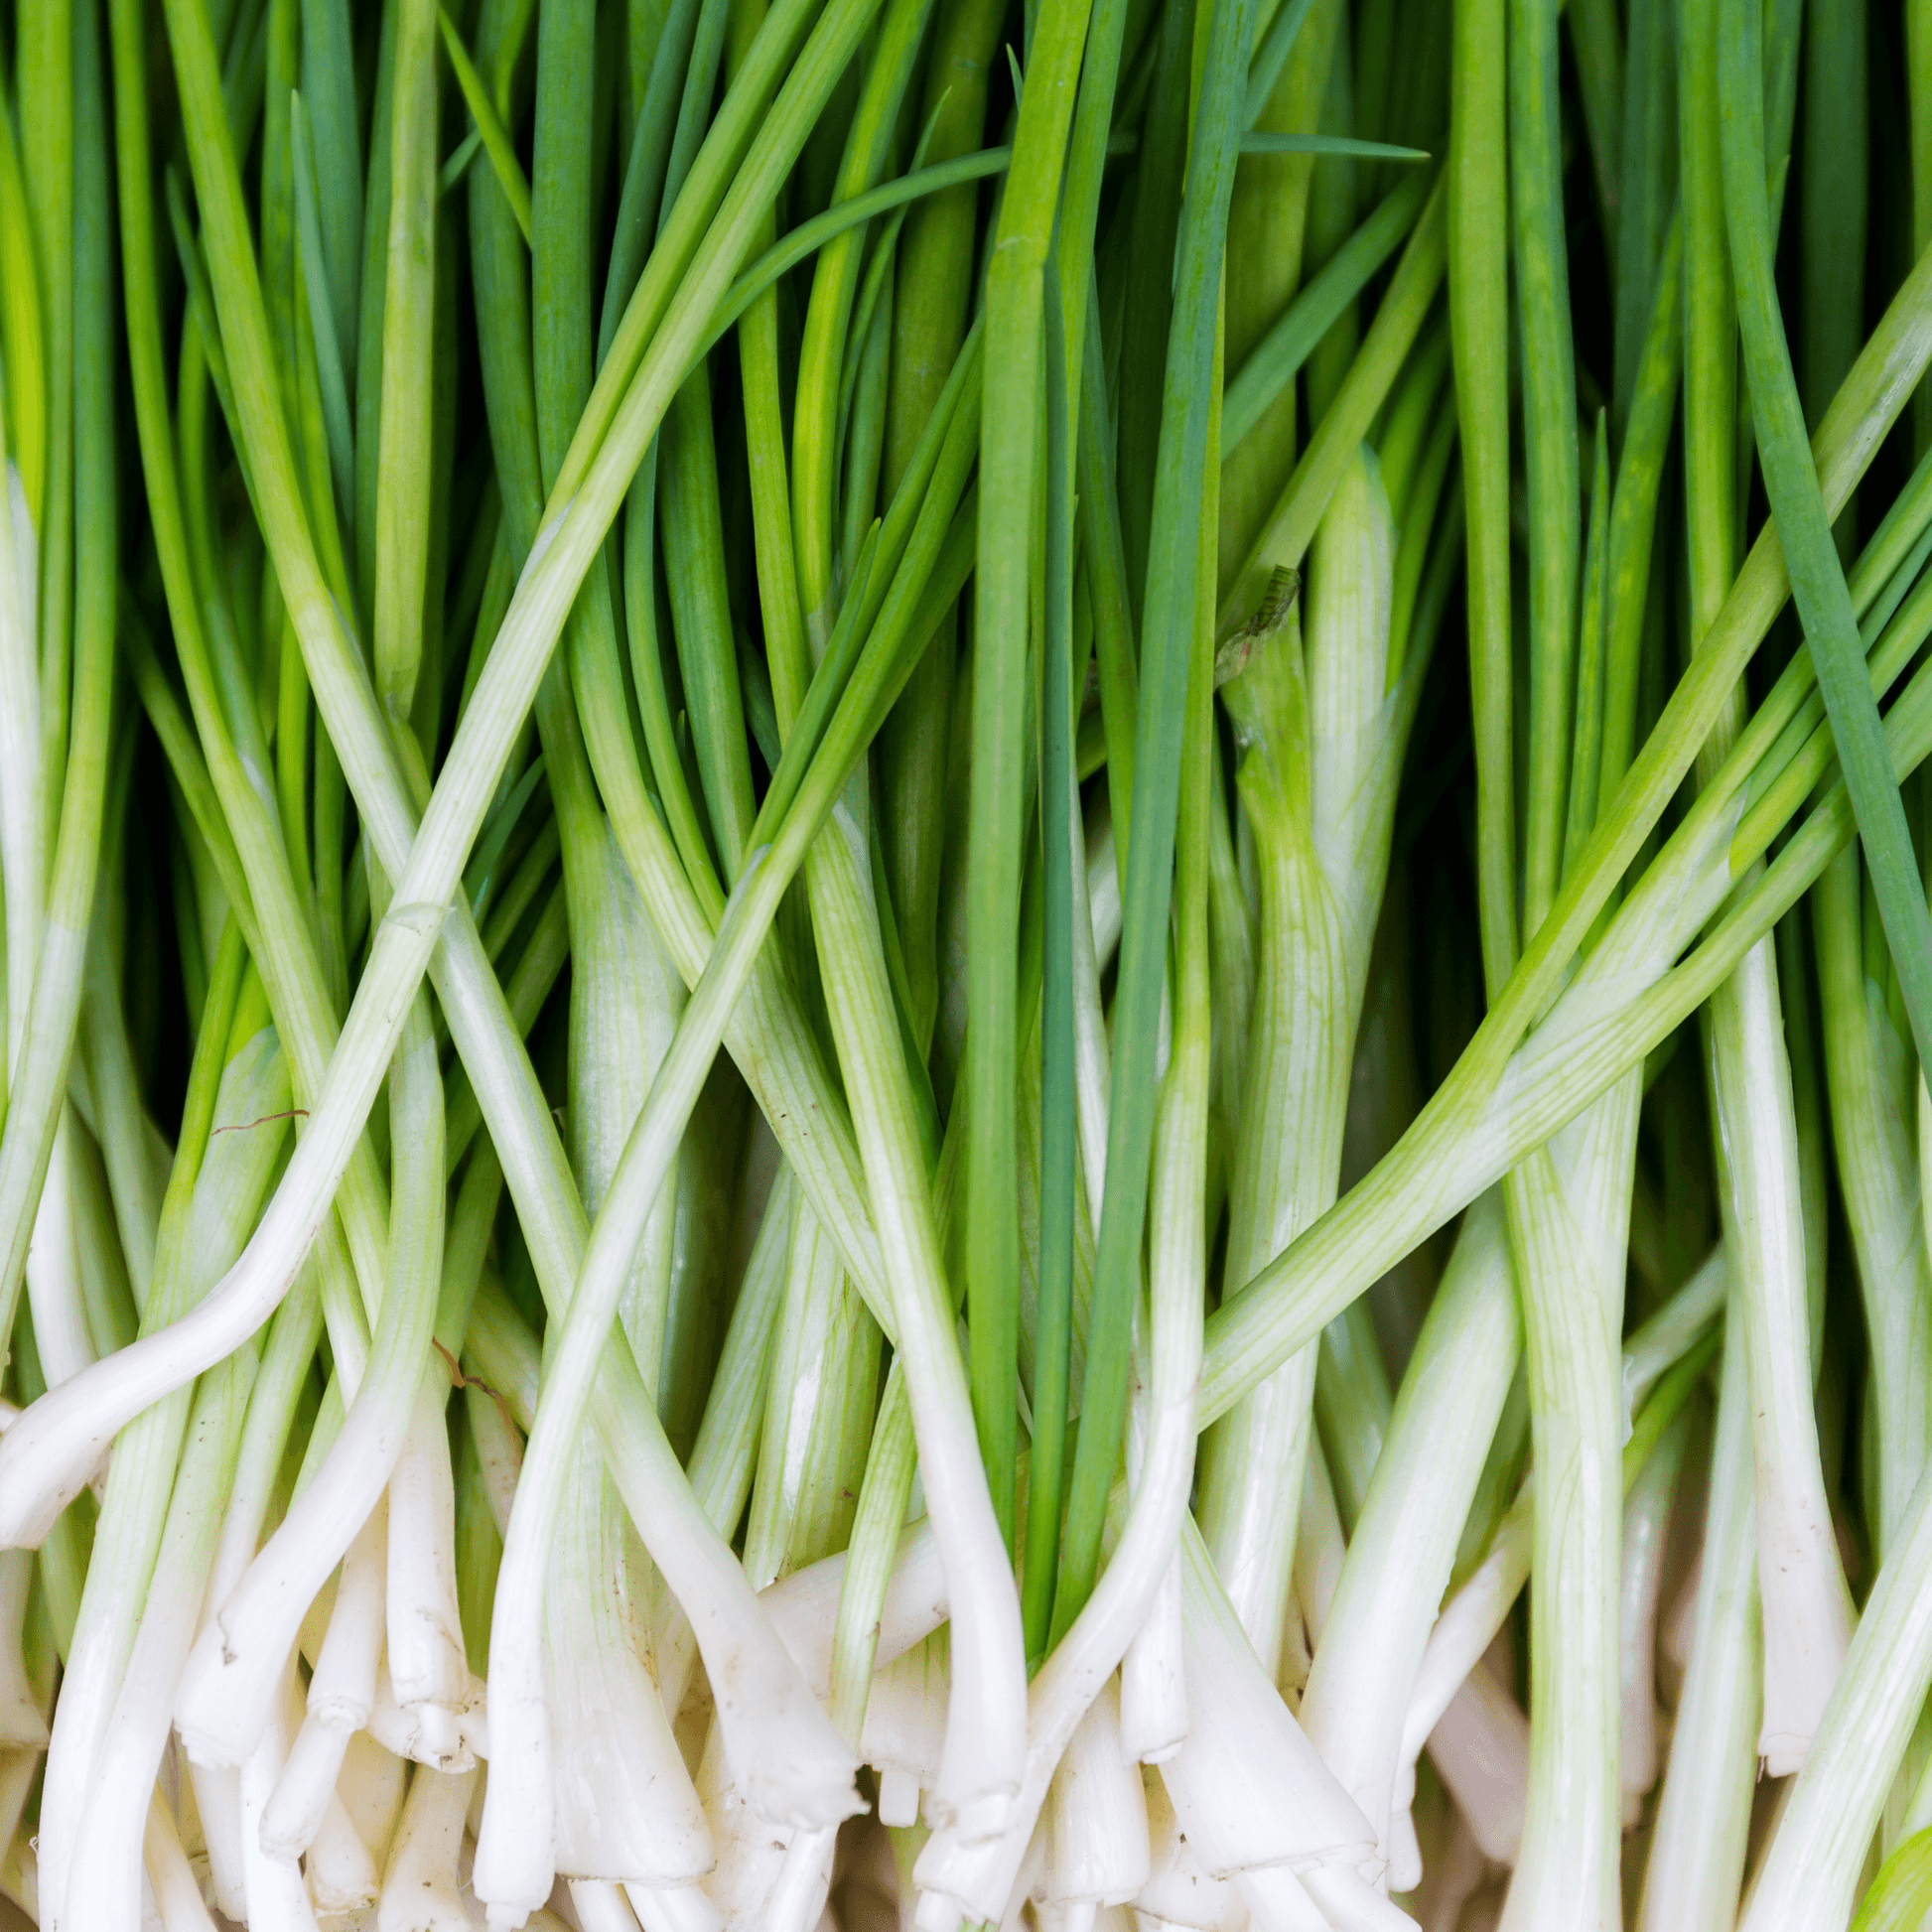 Tokyo Long White Bunching Onions - Hasty Roots